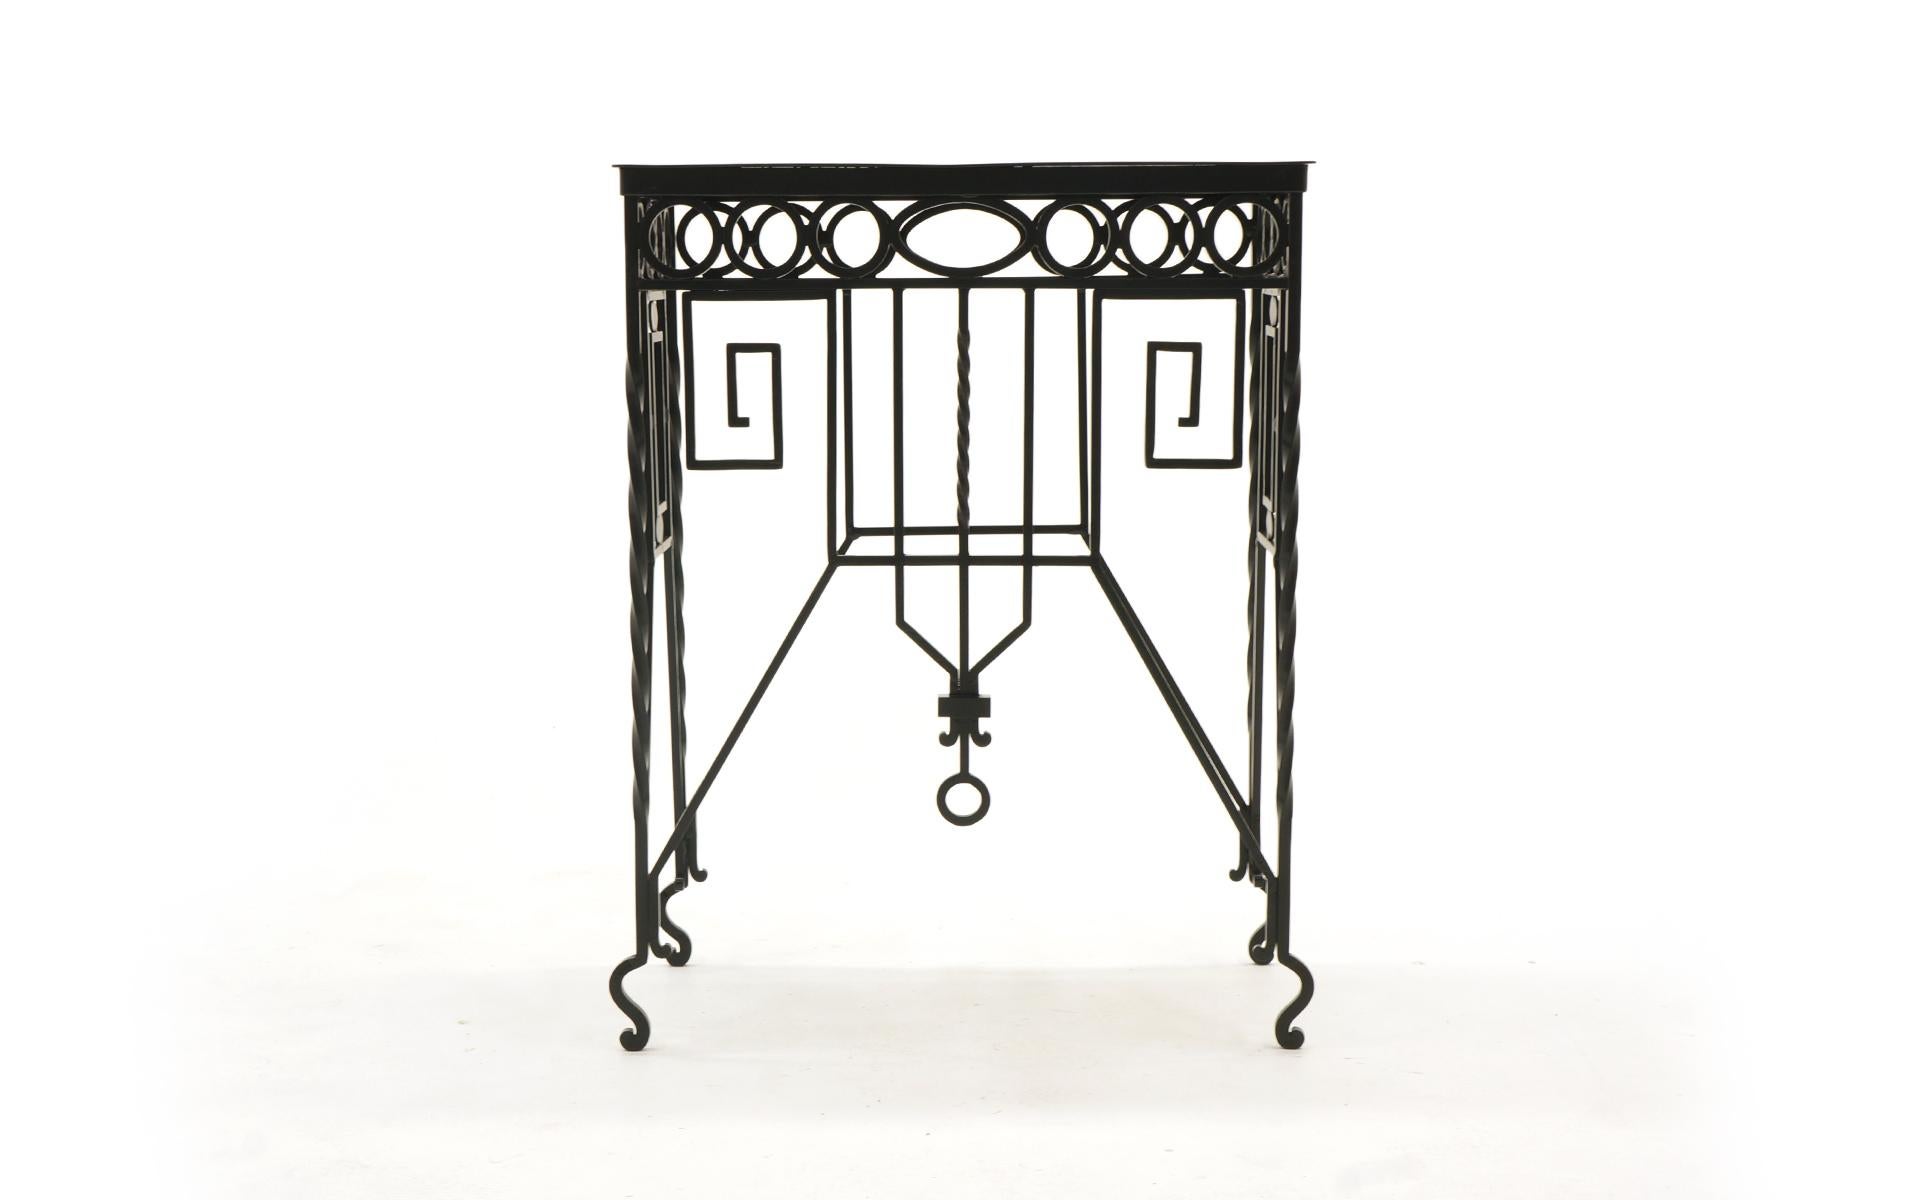 Beautifully crafted Mission / Arts & Crafts wrought iron table. About 33 inches tall. Can be used indoors or outdoors. We have had it expertly media blasted and powder coated in a satin black finish.